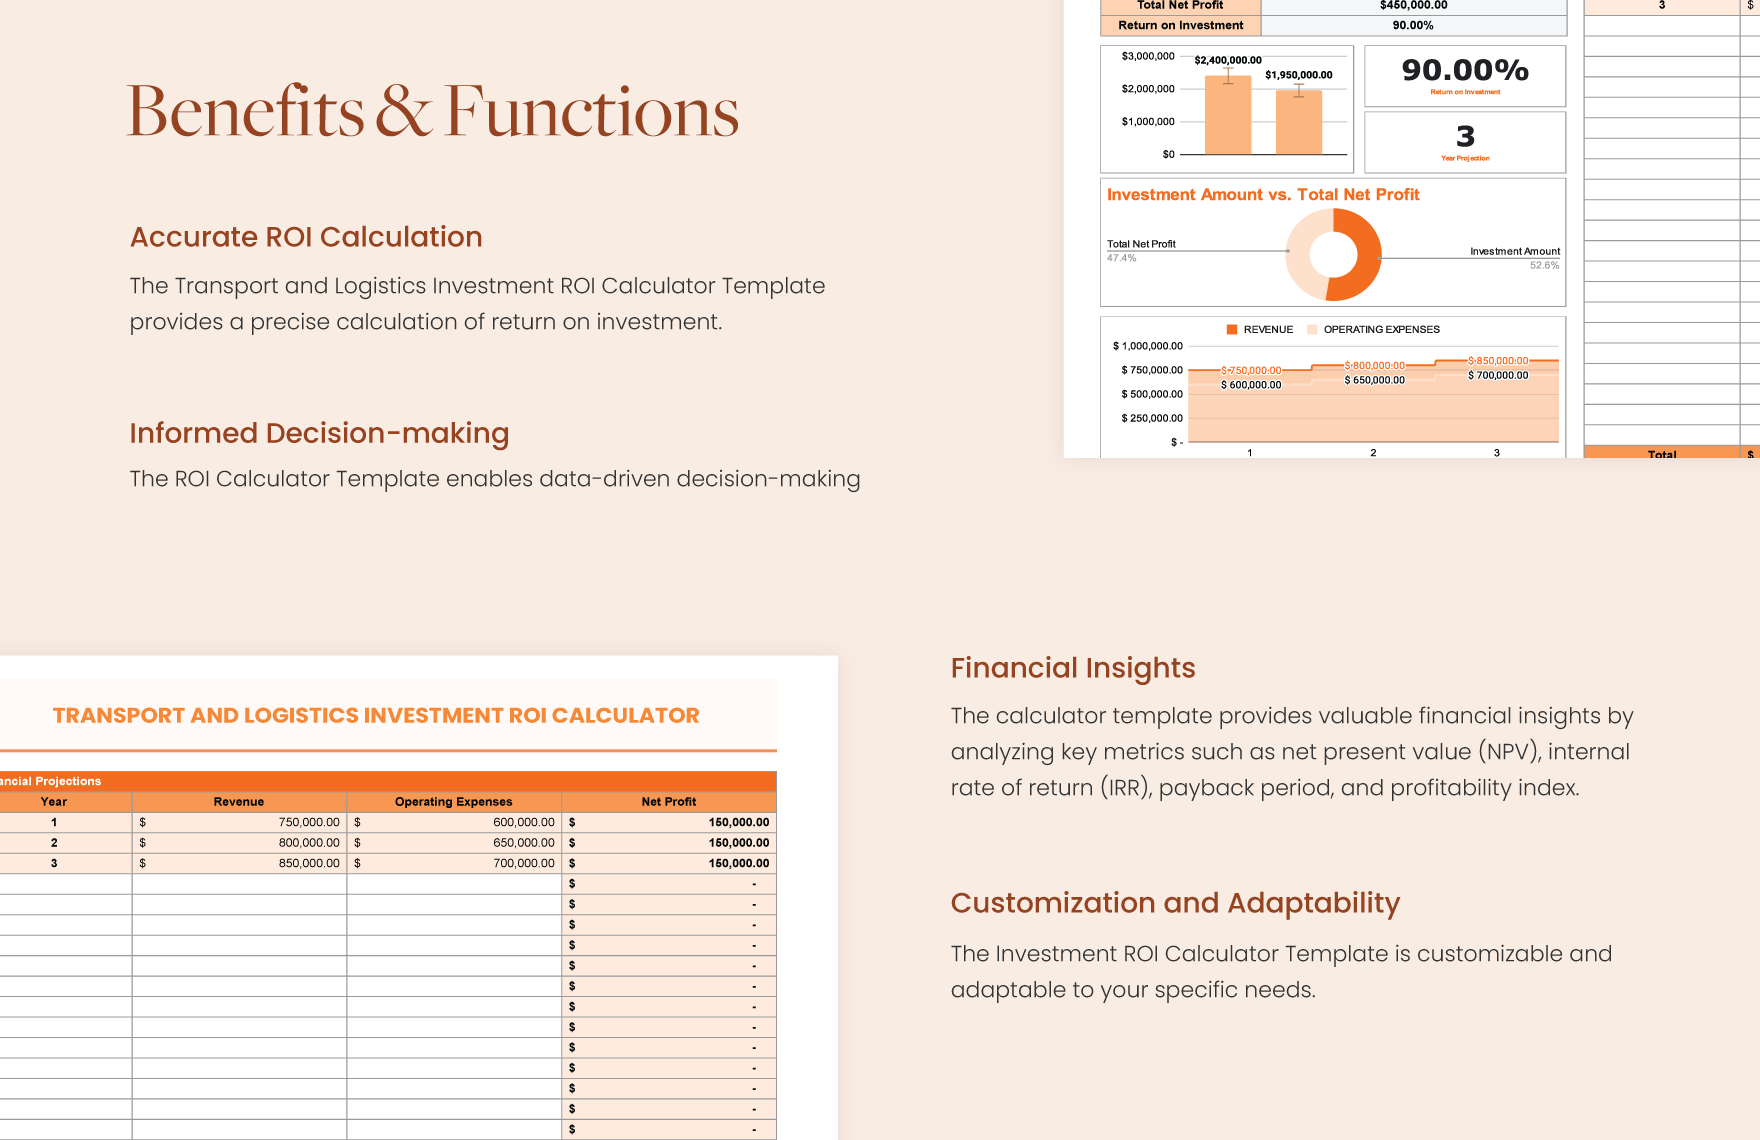 Transport and Logistics Investment ROI Calculator Template